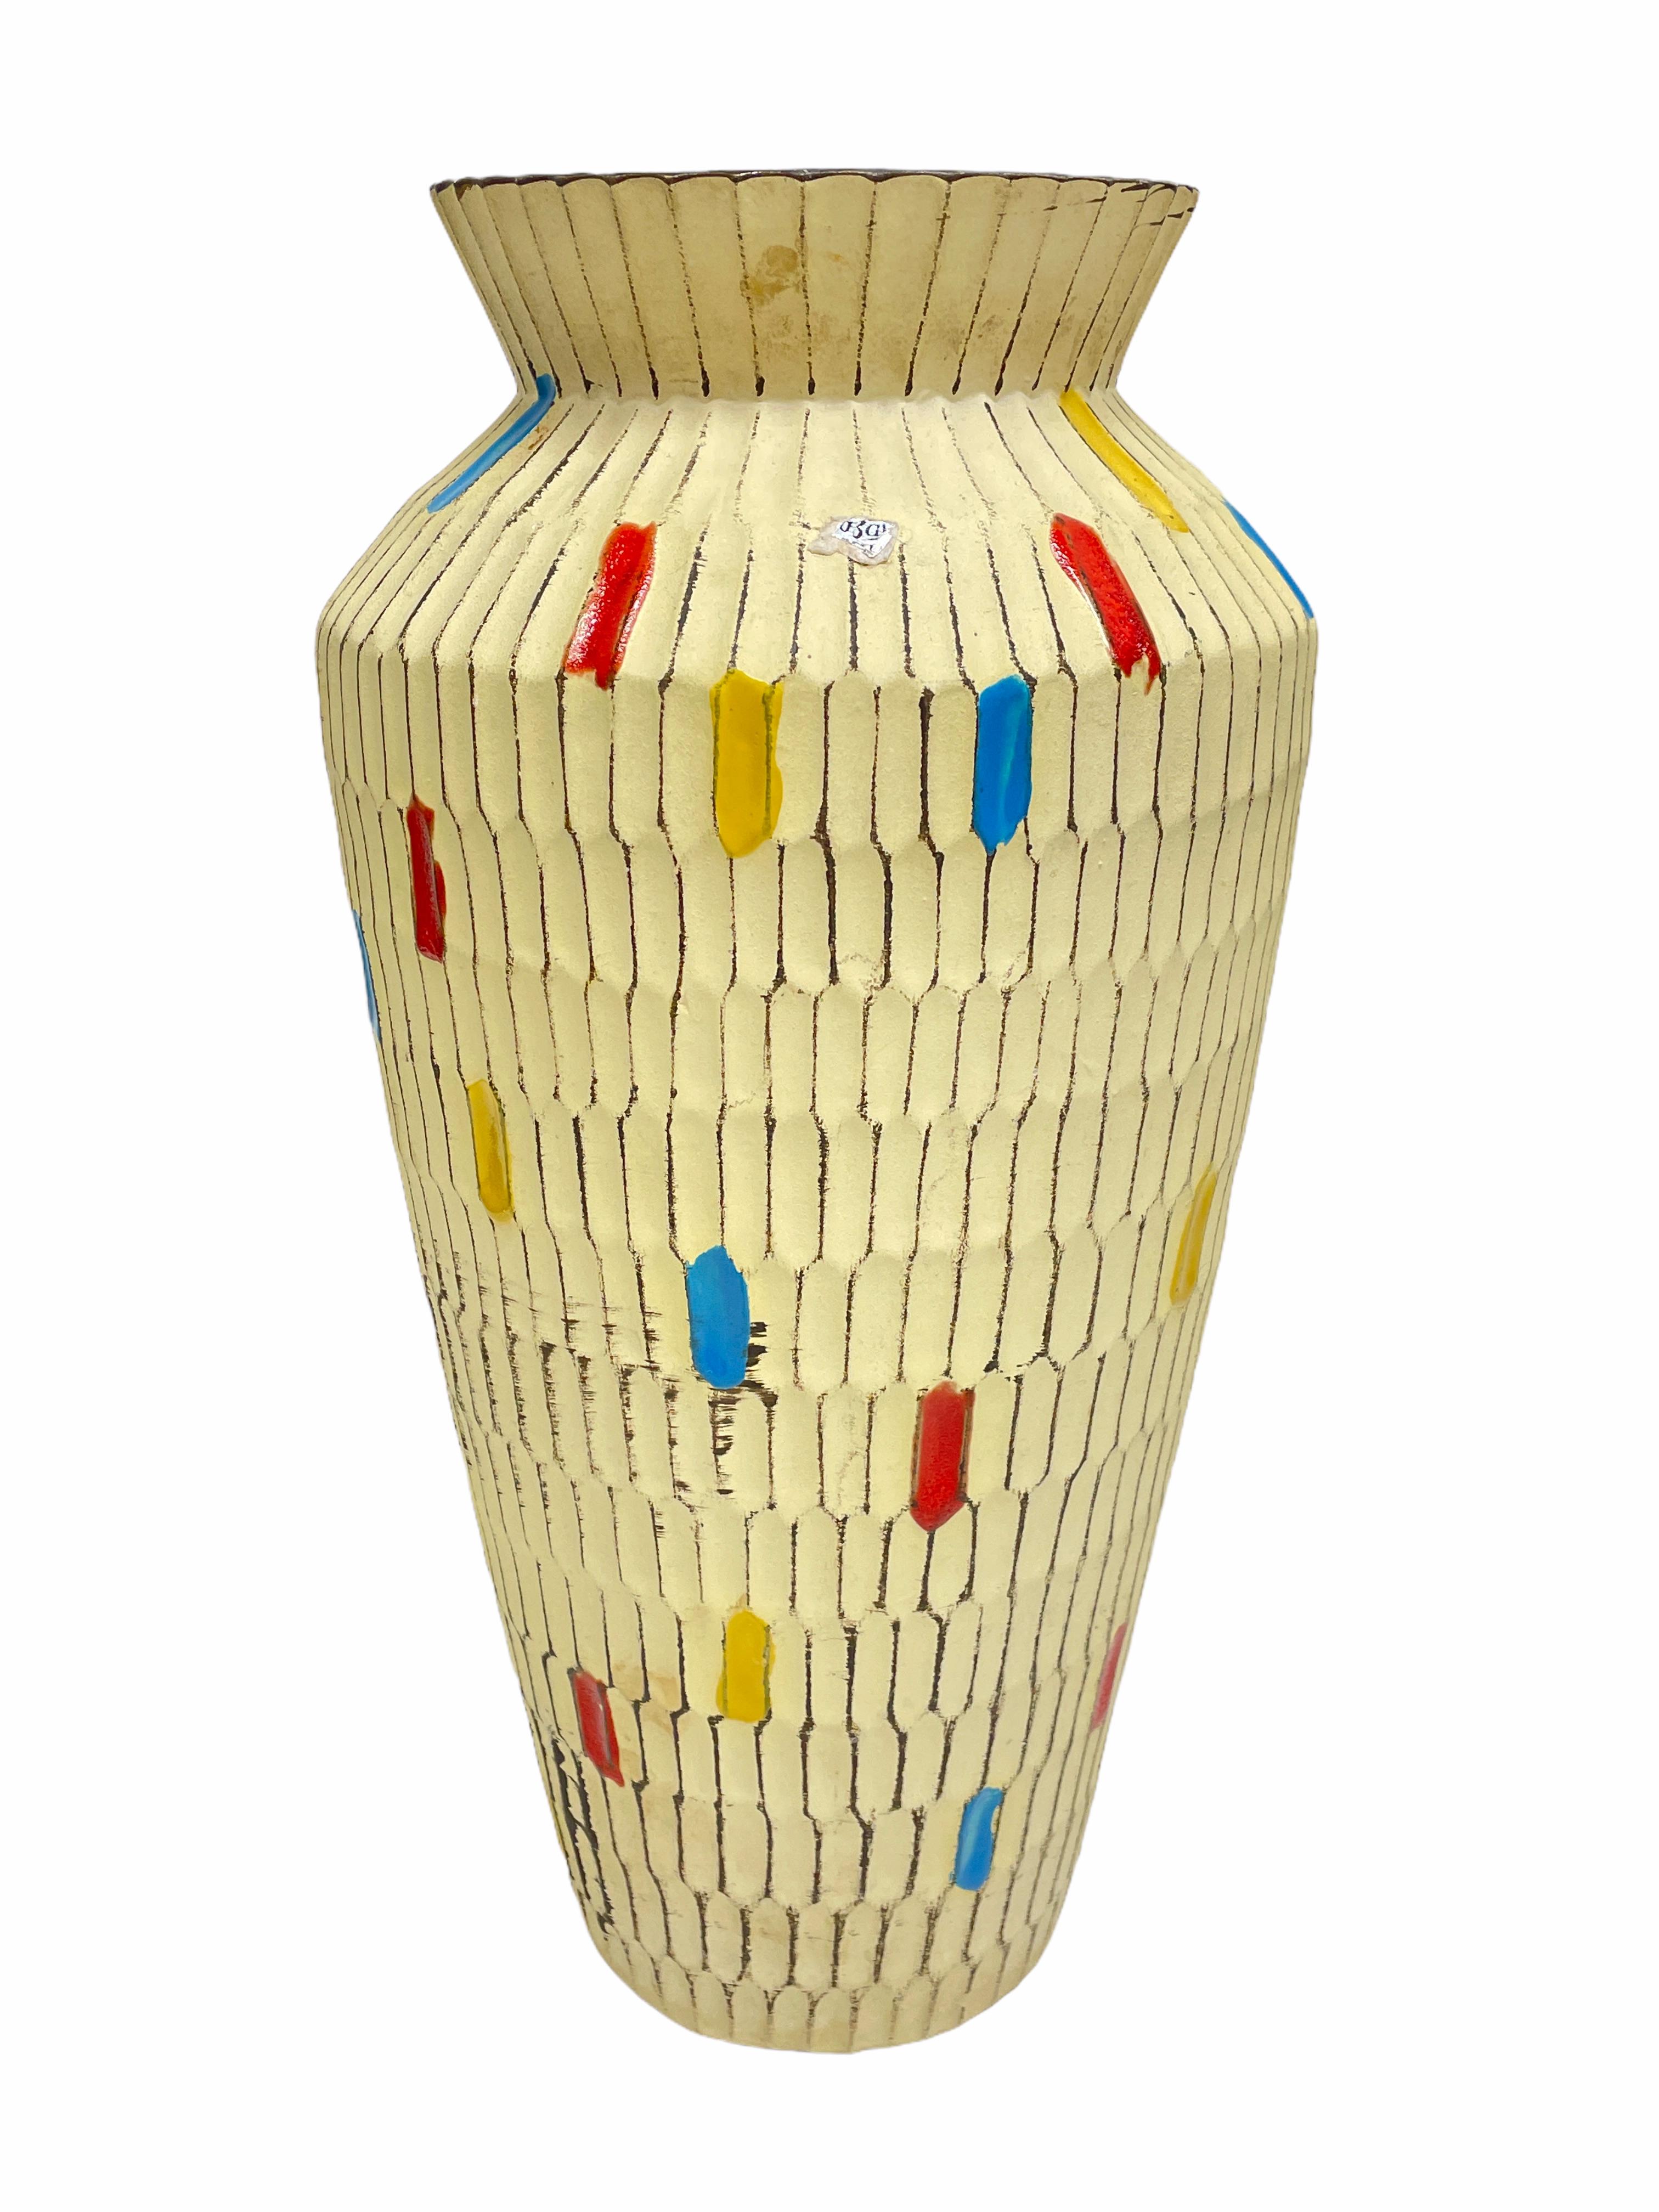 An amazing midcentury studio art pottery vase made in Germany, circa 1950s. Vase is in very good condition with no chips, cracks, or flea bites. Signed with parts of the old Label.